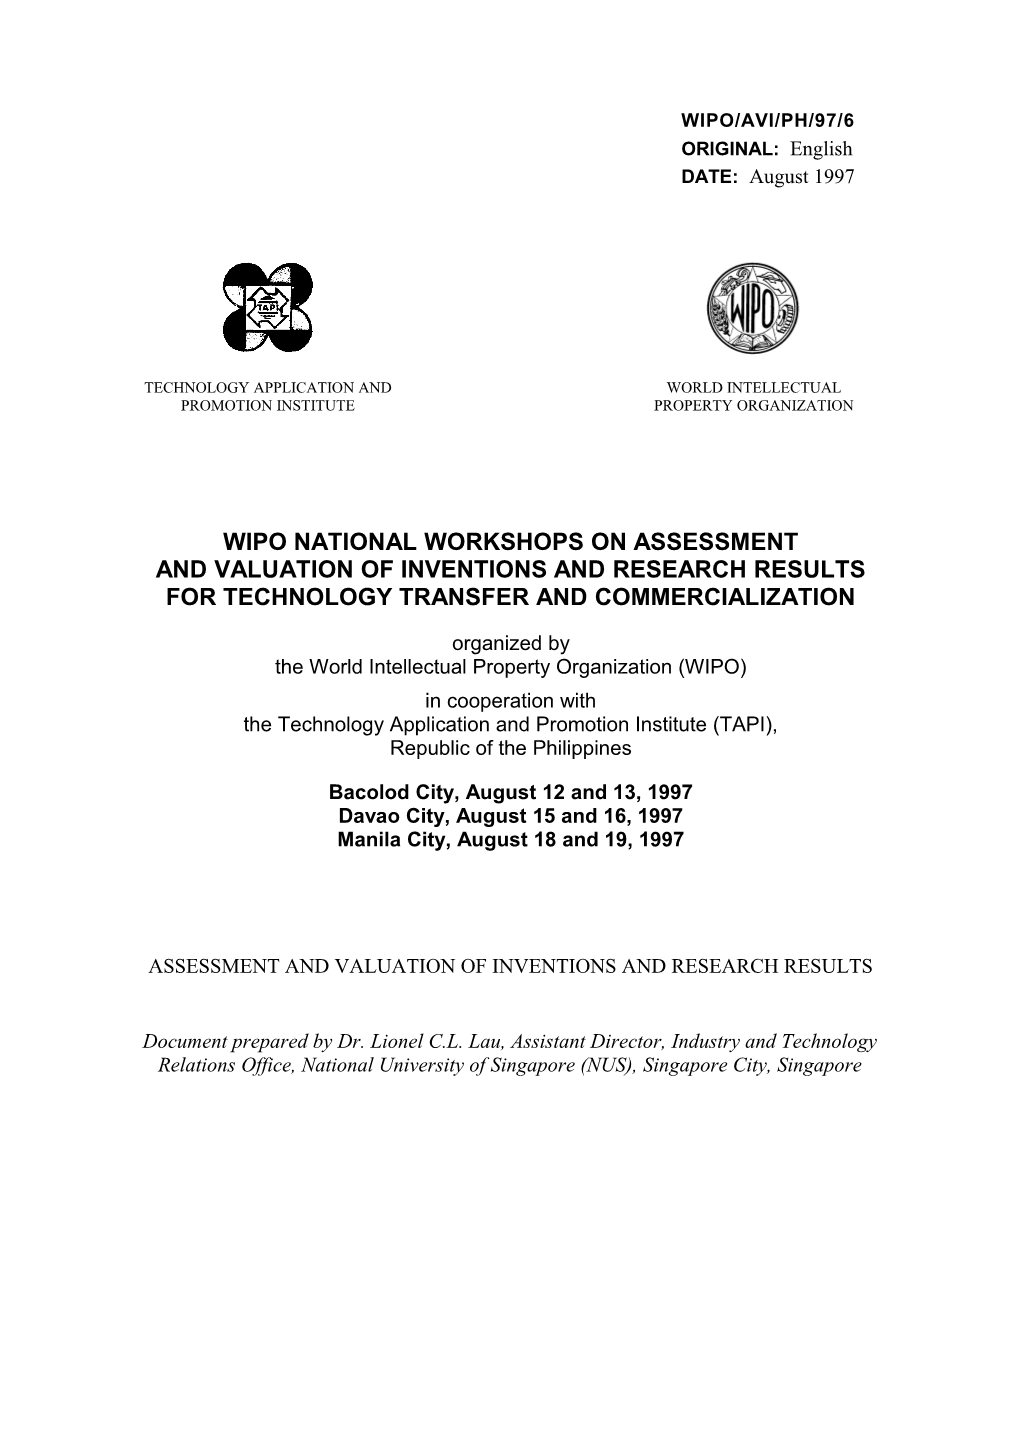 WIPO/AVI/PH/97/6: Assessment and Valuation of Inventions and Research Results